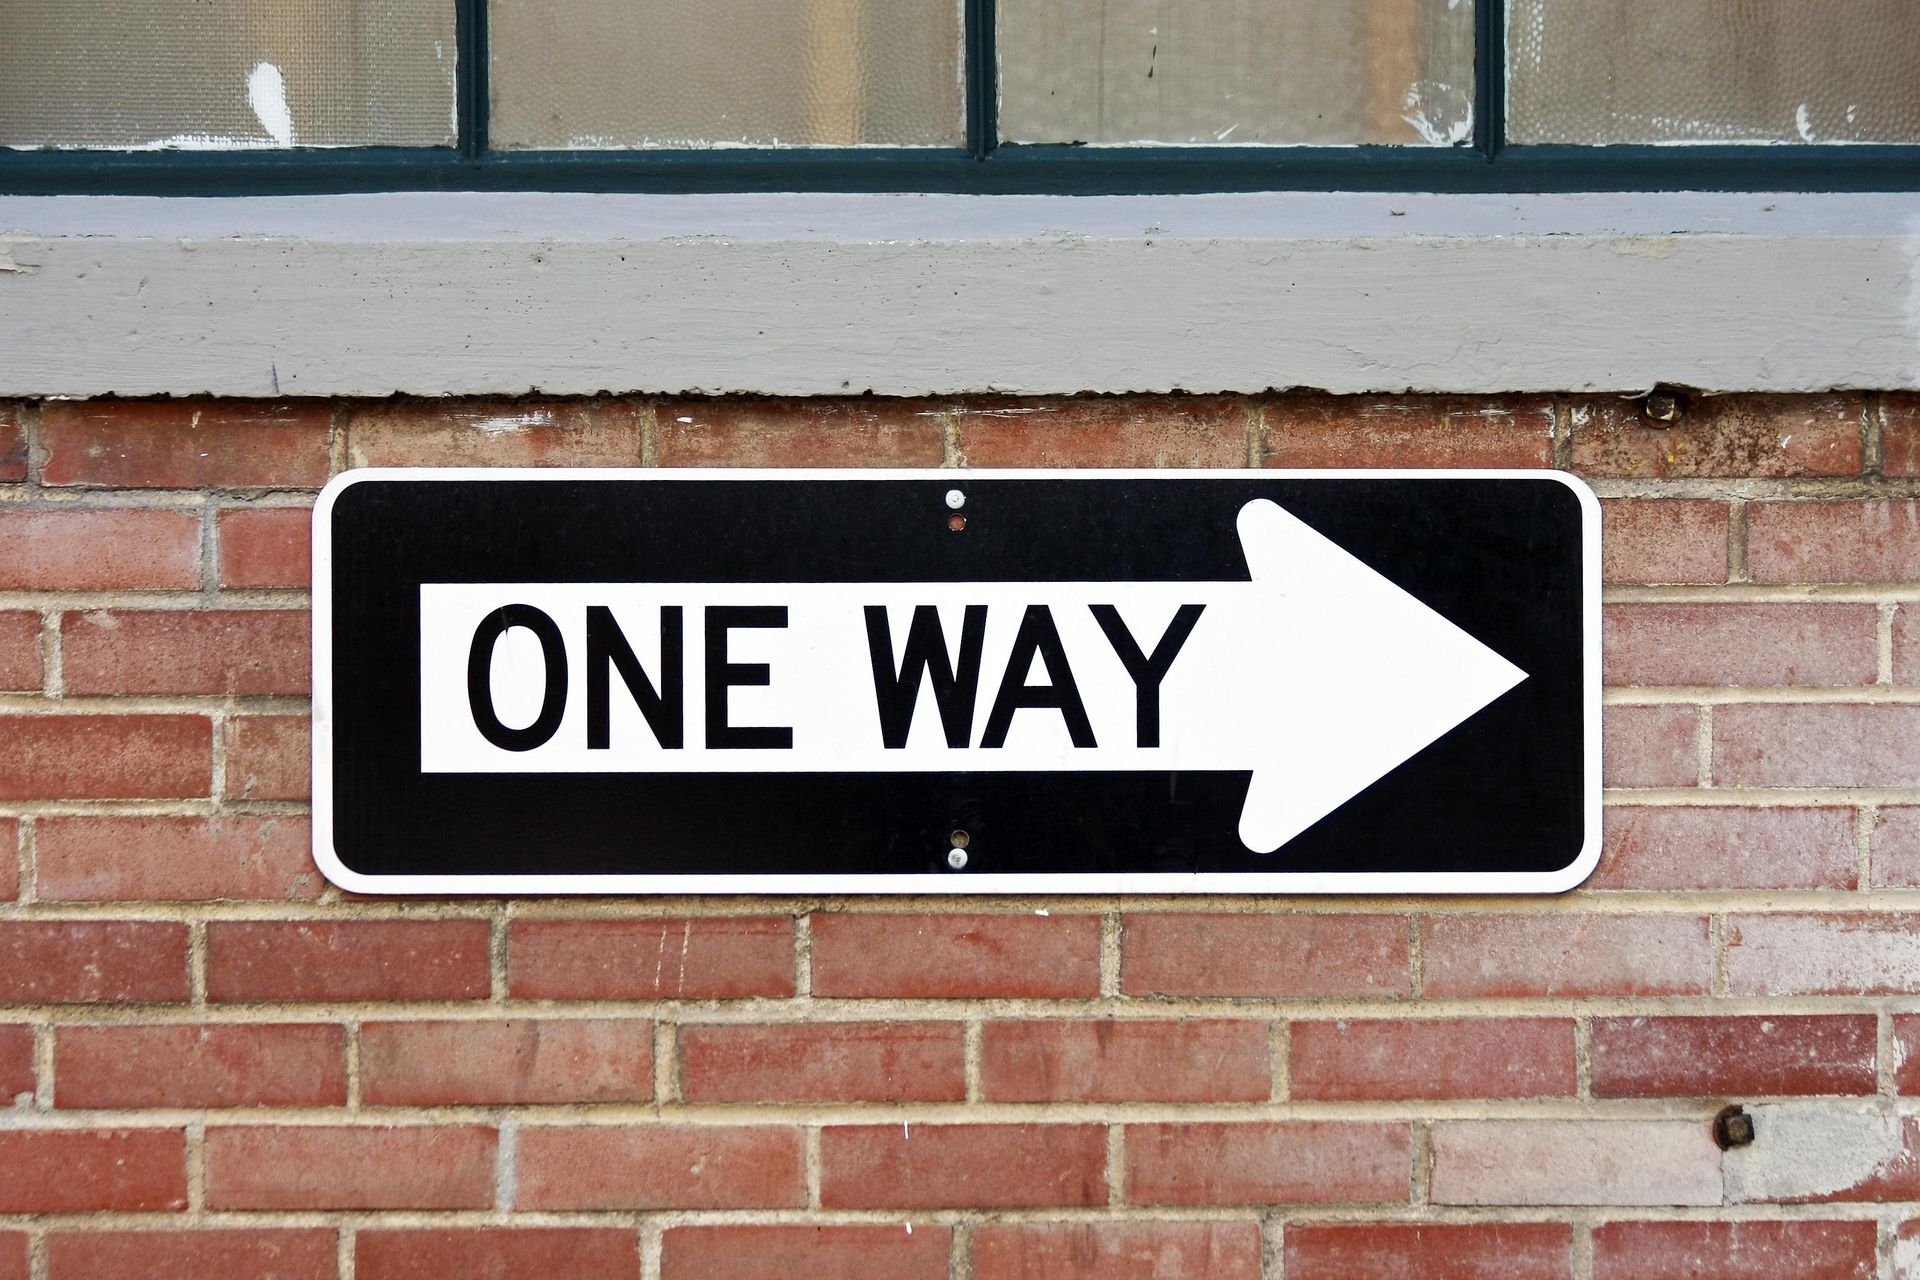 A one-way sign mounted on a red brick wall.